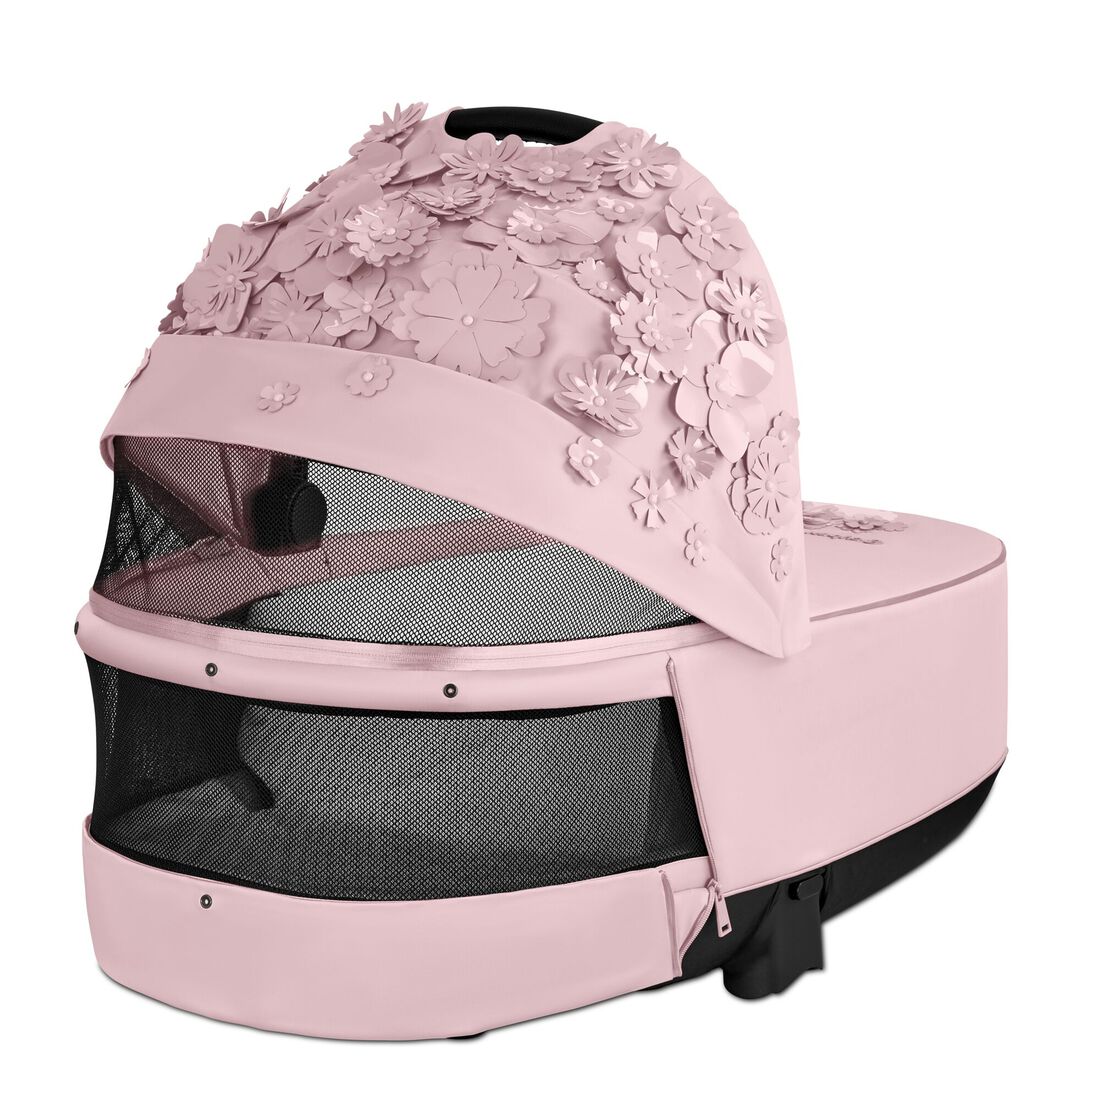 CYBEX Priam 3 Lux Carry Cot - Pale Blush in Pale Blush large image number 4